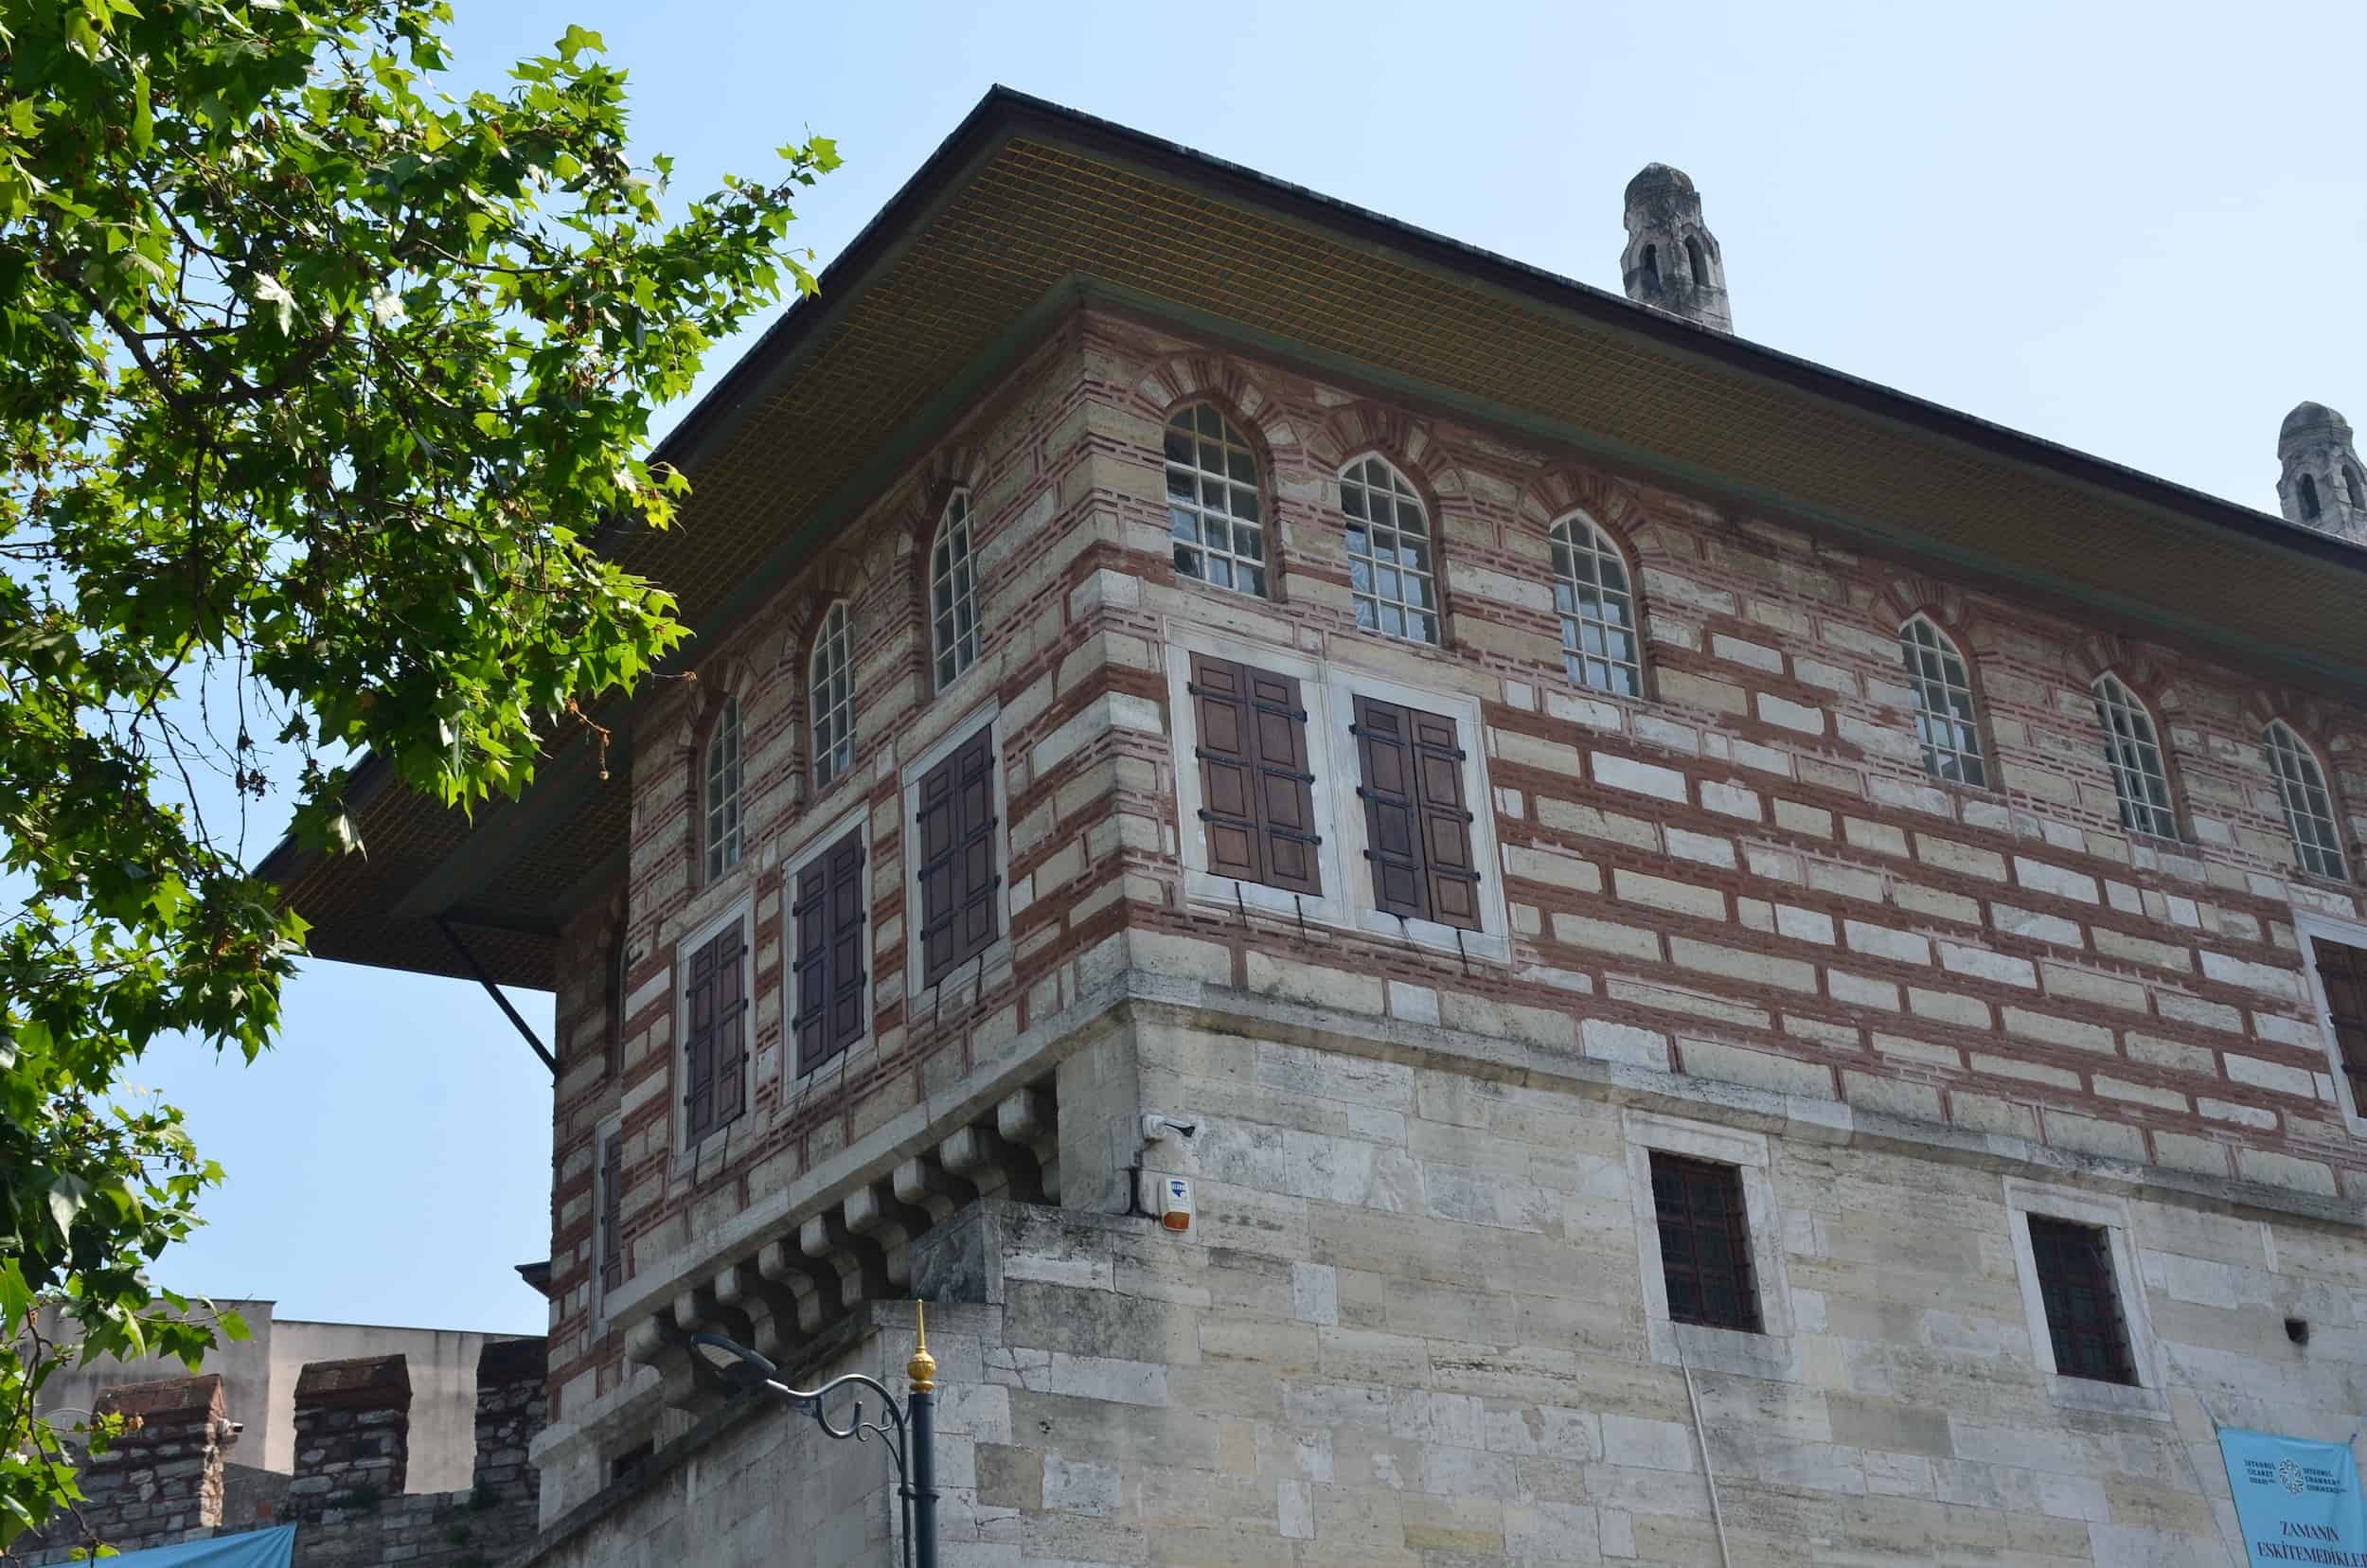 Sultan's Pavilion at the New Mosque in Eminönü, Istanbul, Turkey